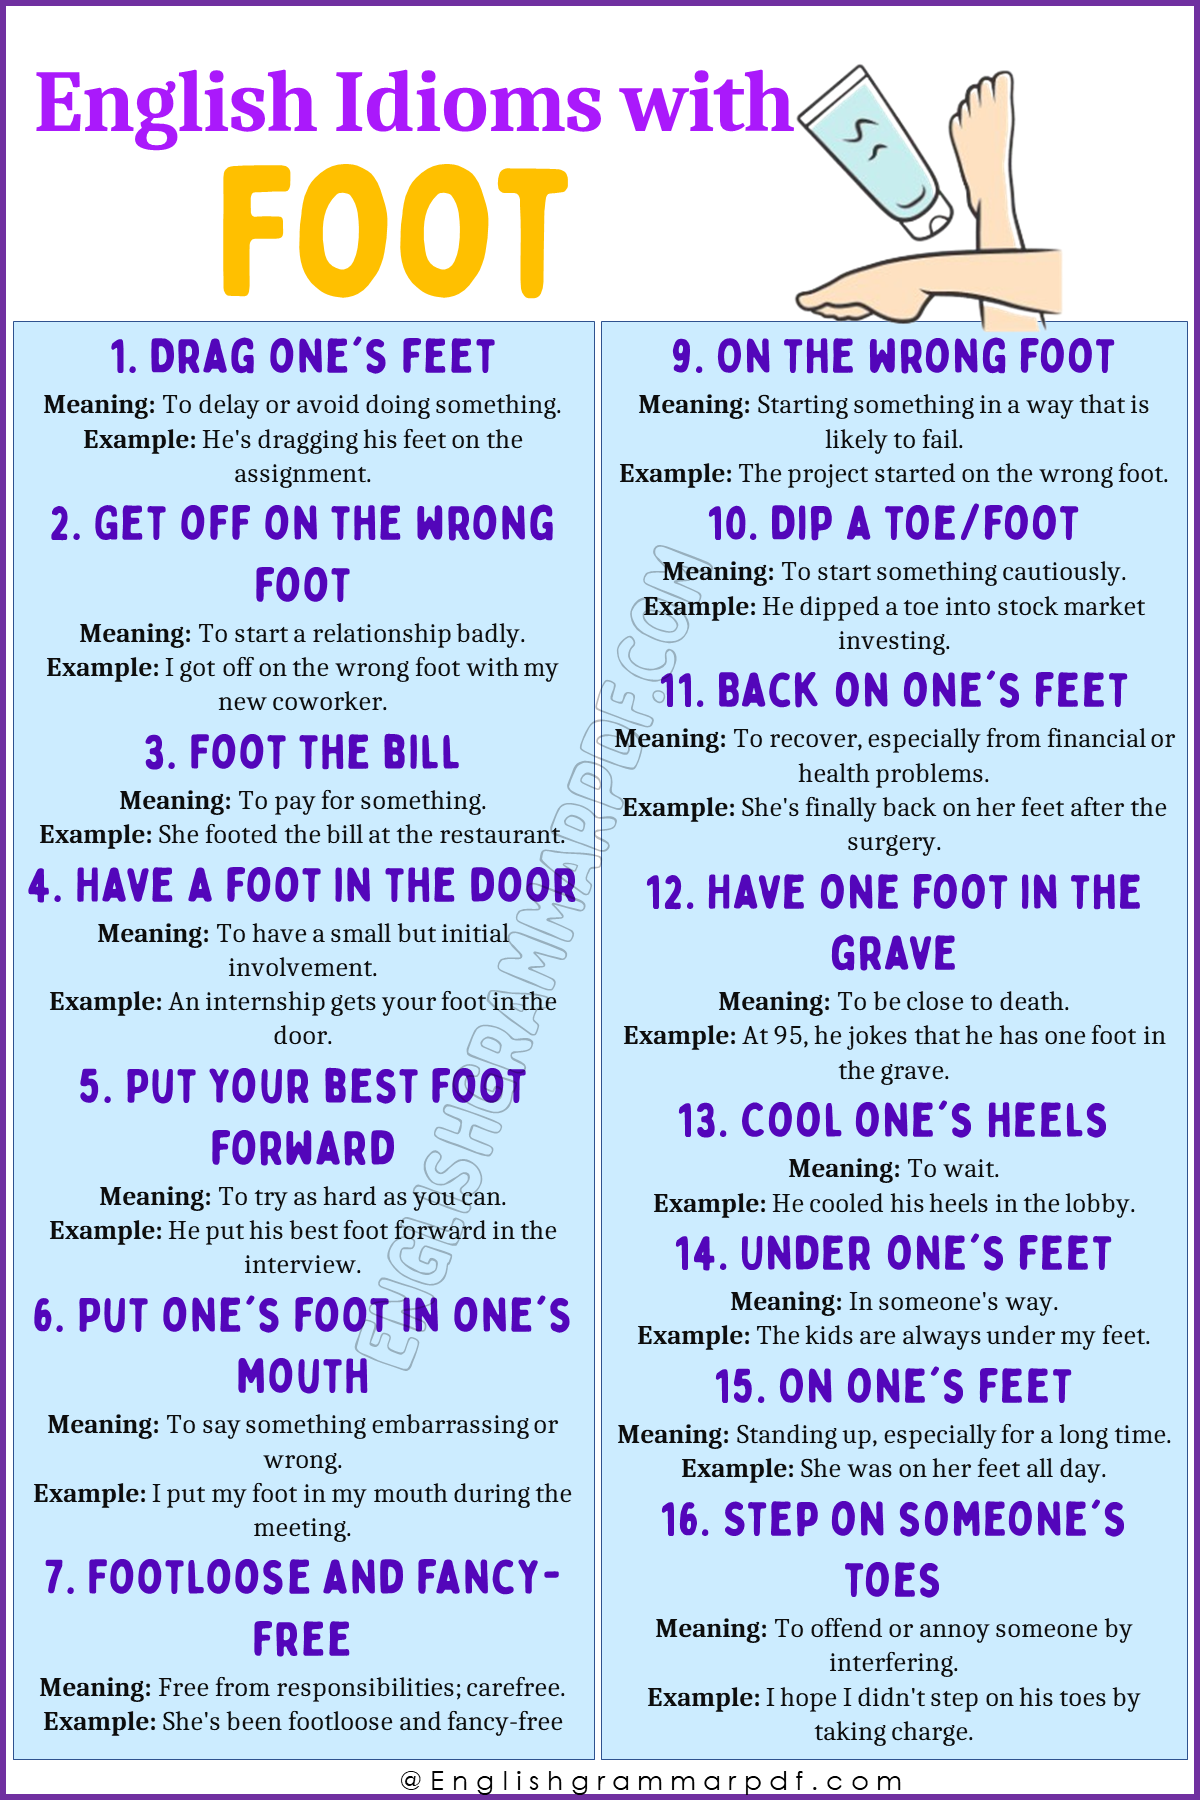 English Idioms with Foot